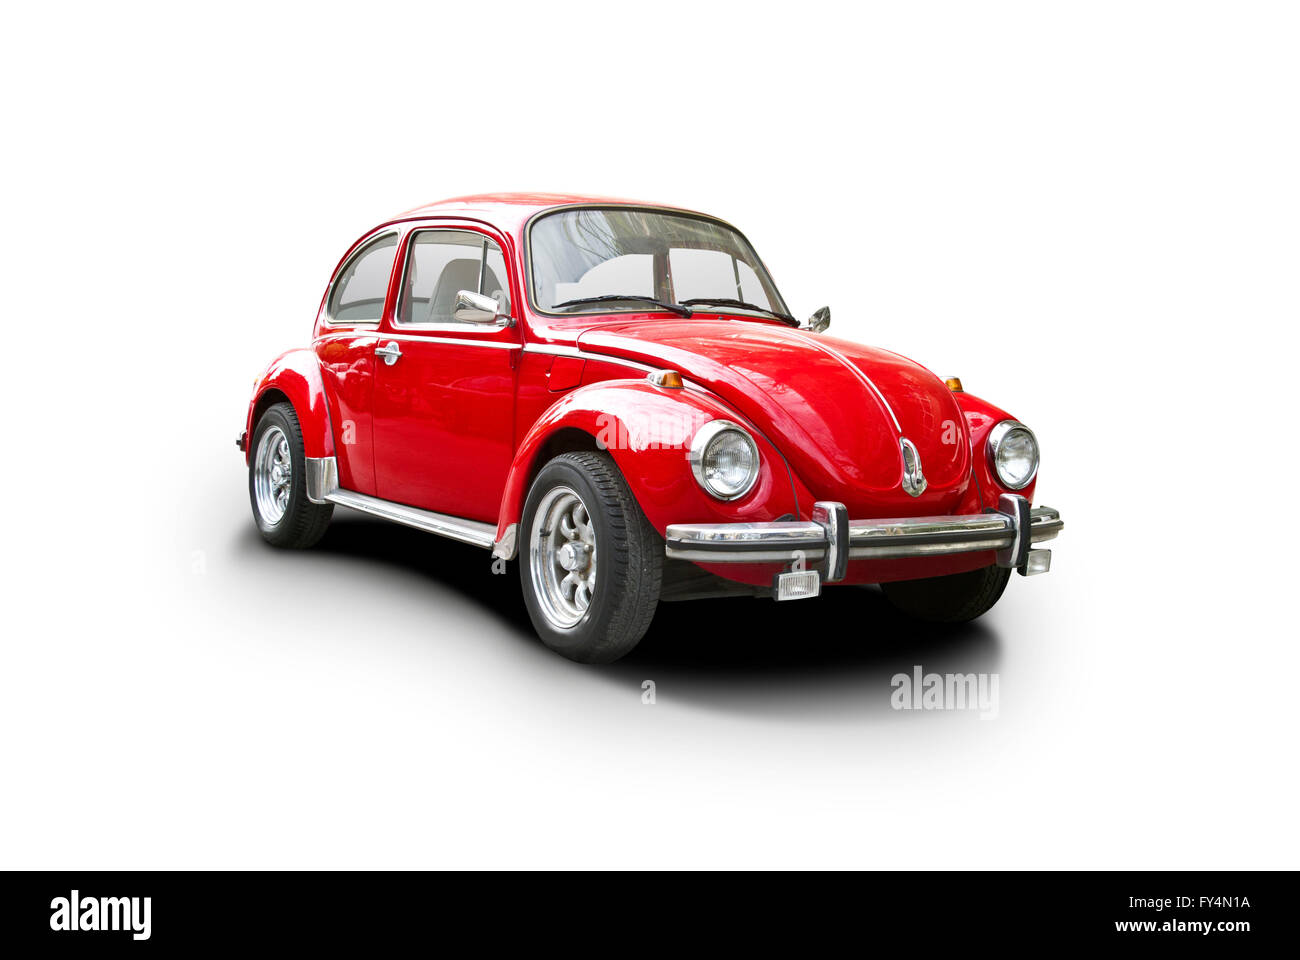 Vieille voiture de collection isolated on white Banque D'Images